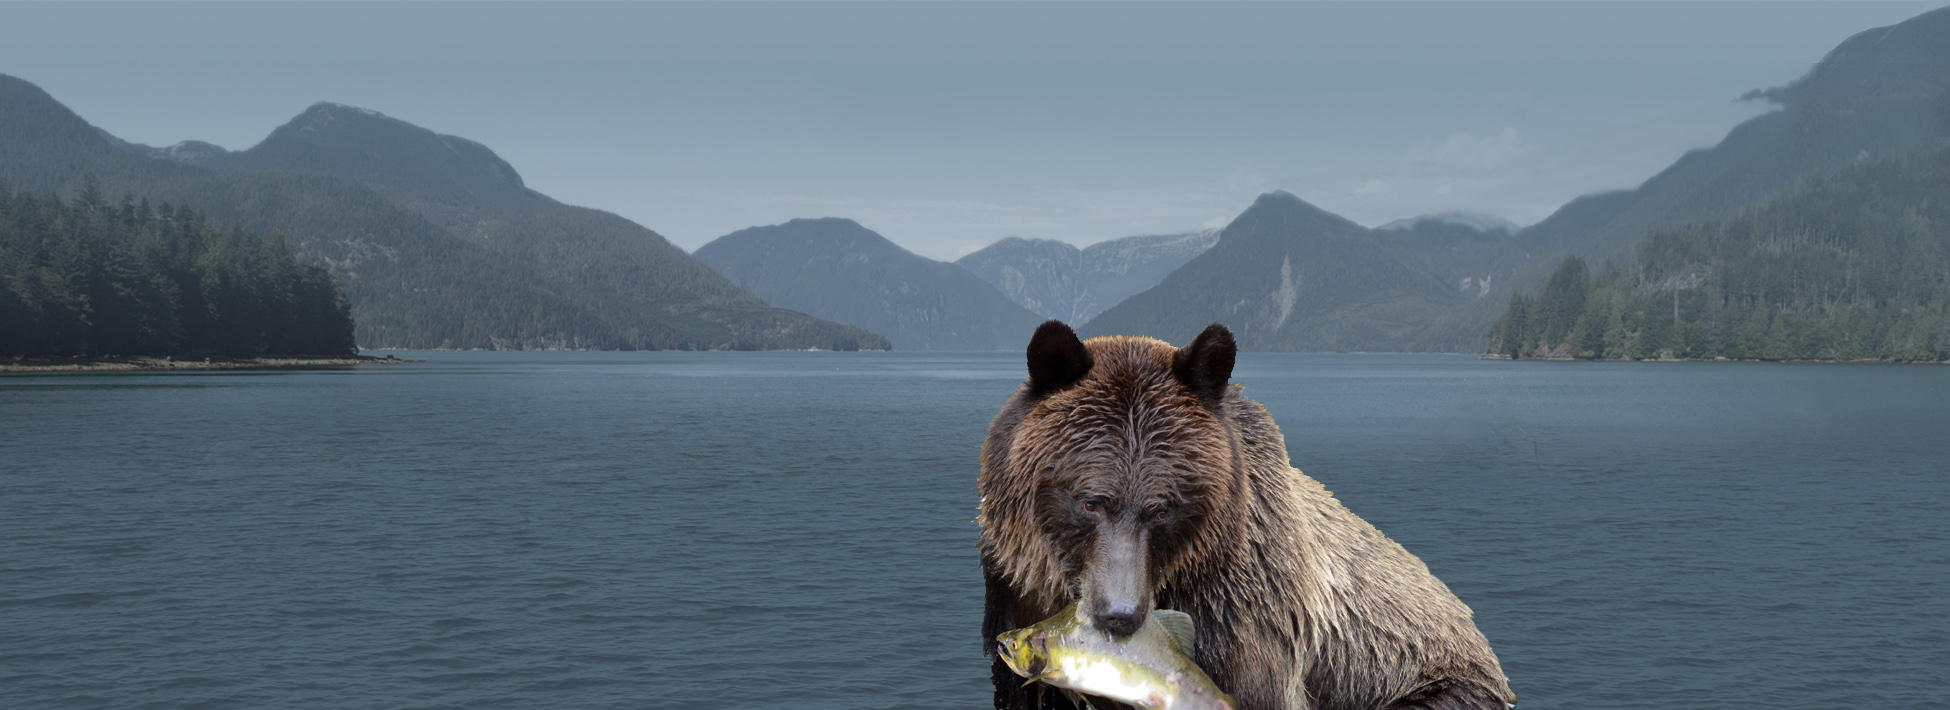 grizzly eating salmon